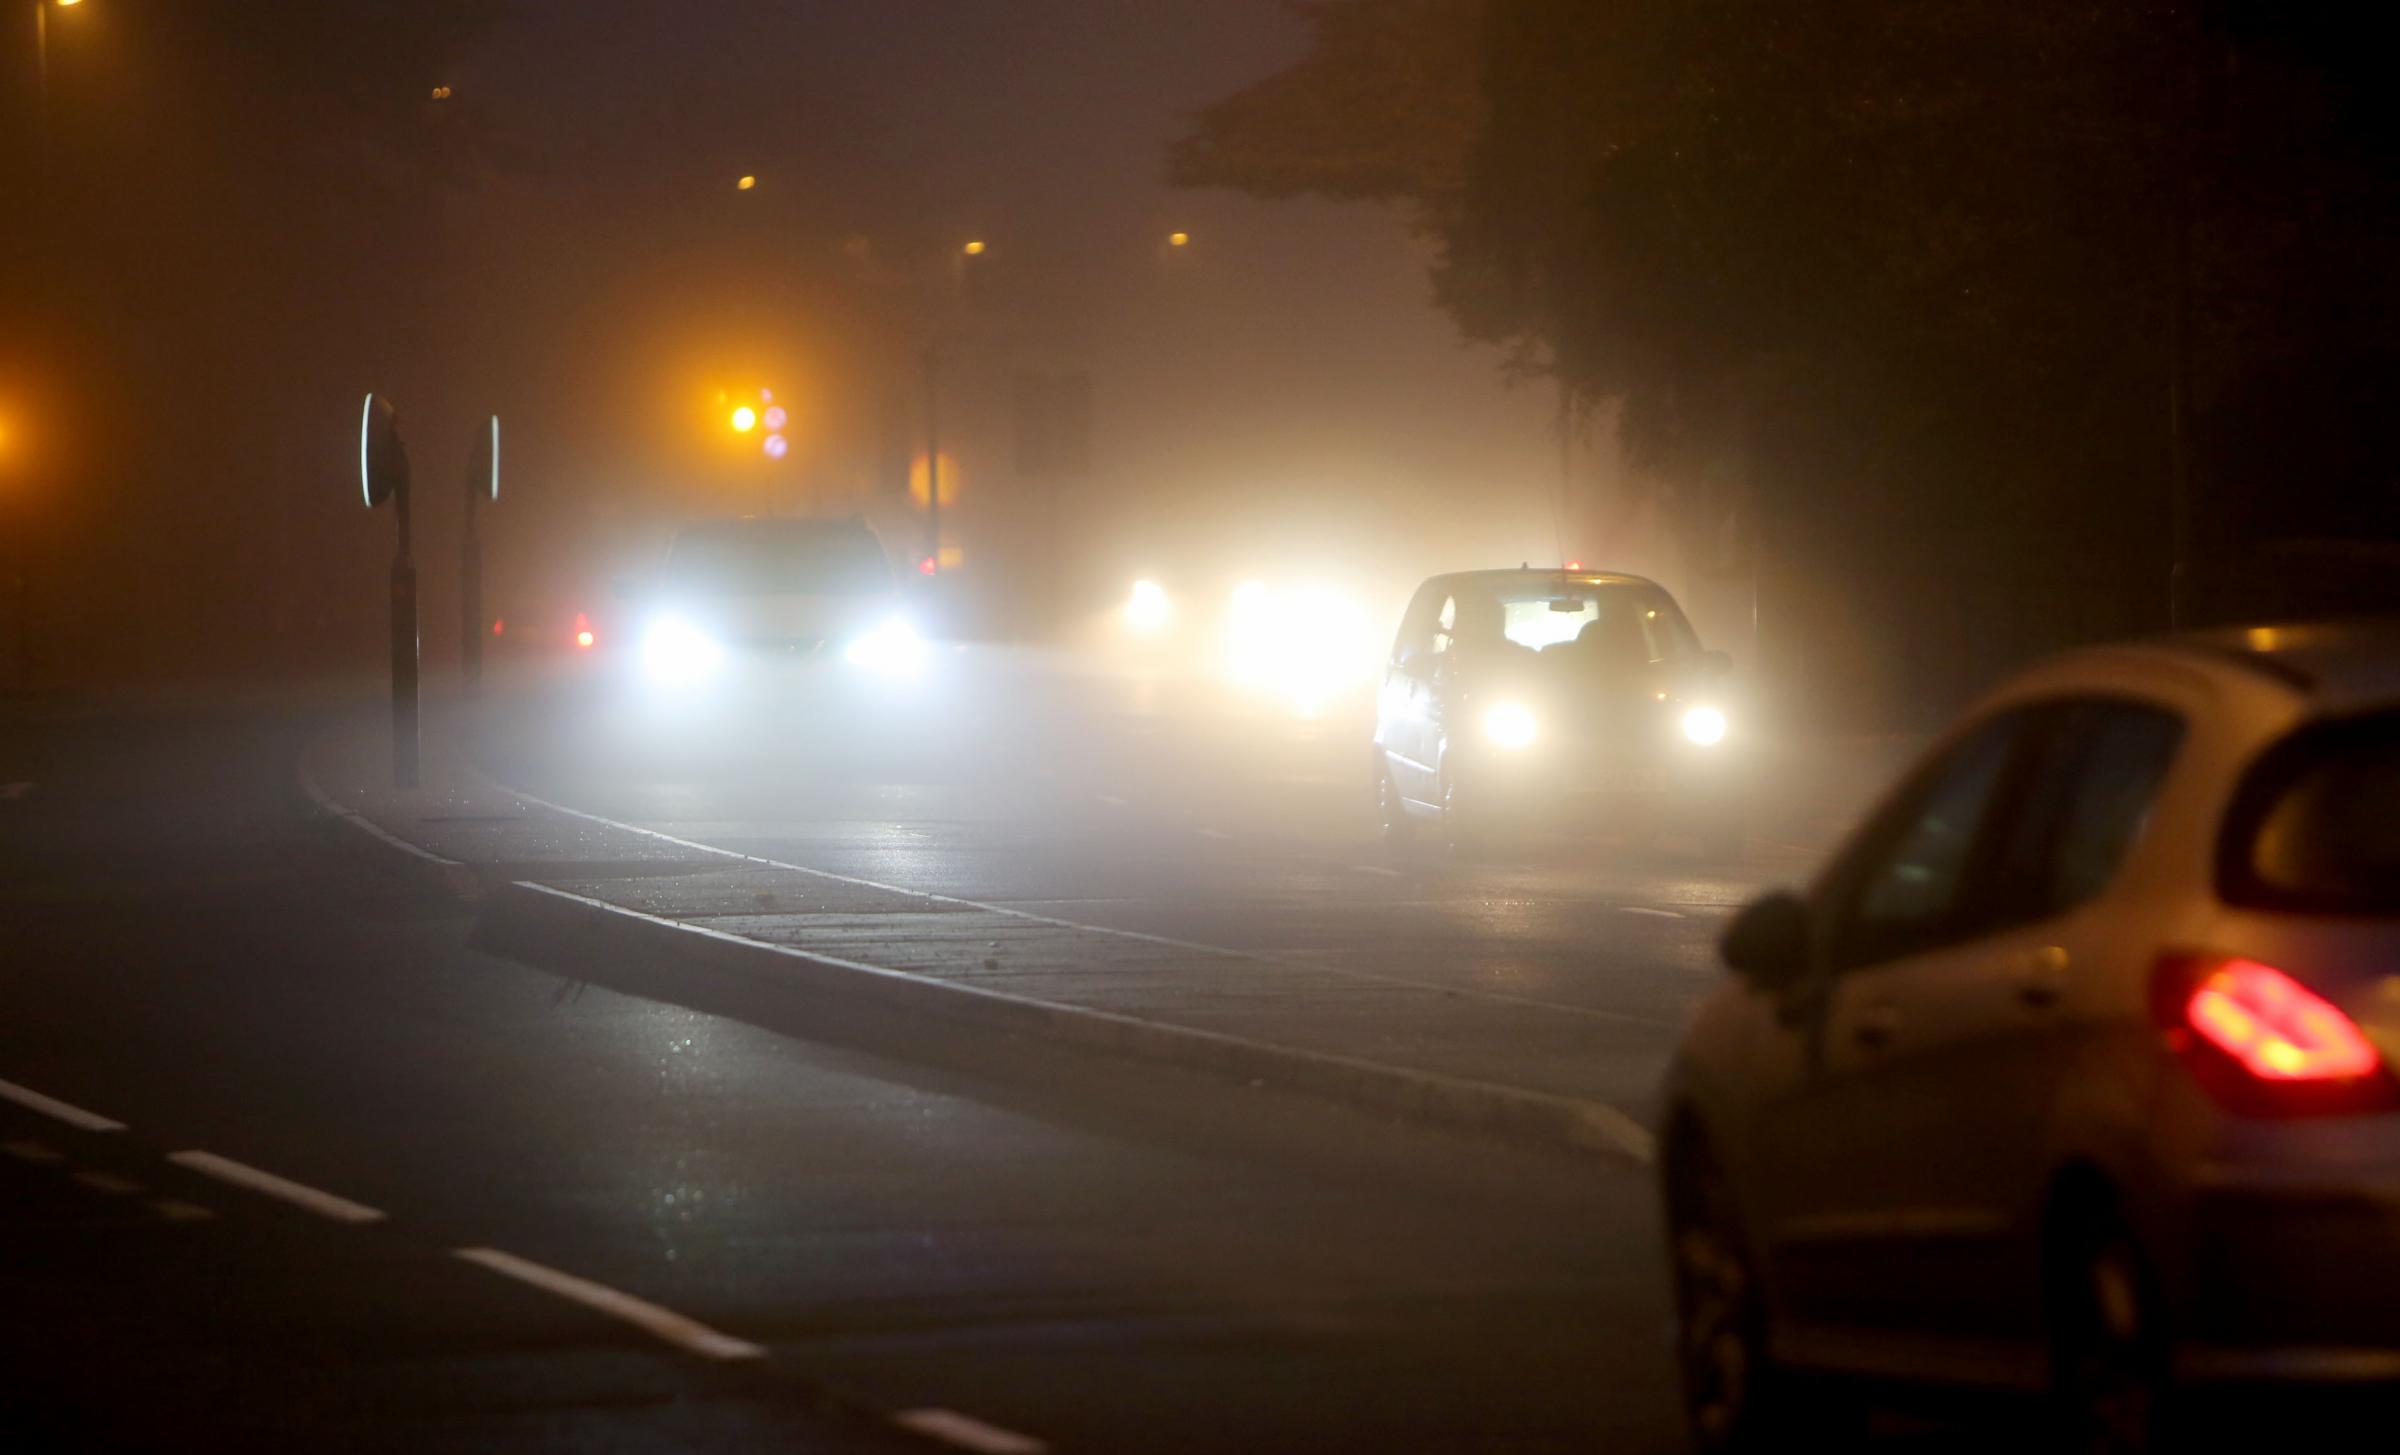 Weather warning issued over freezing fog in parts of Dorset - Bournemouth Echo